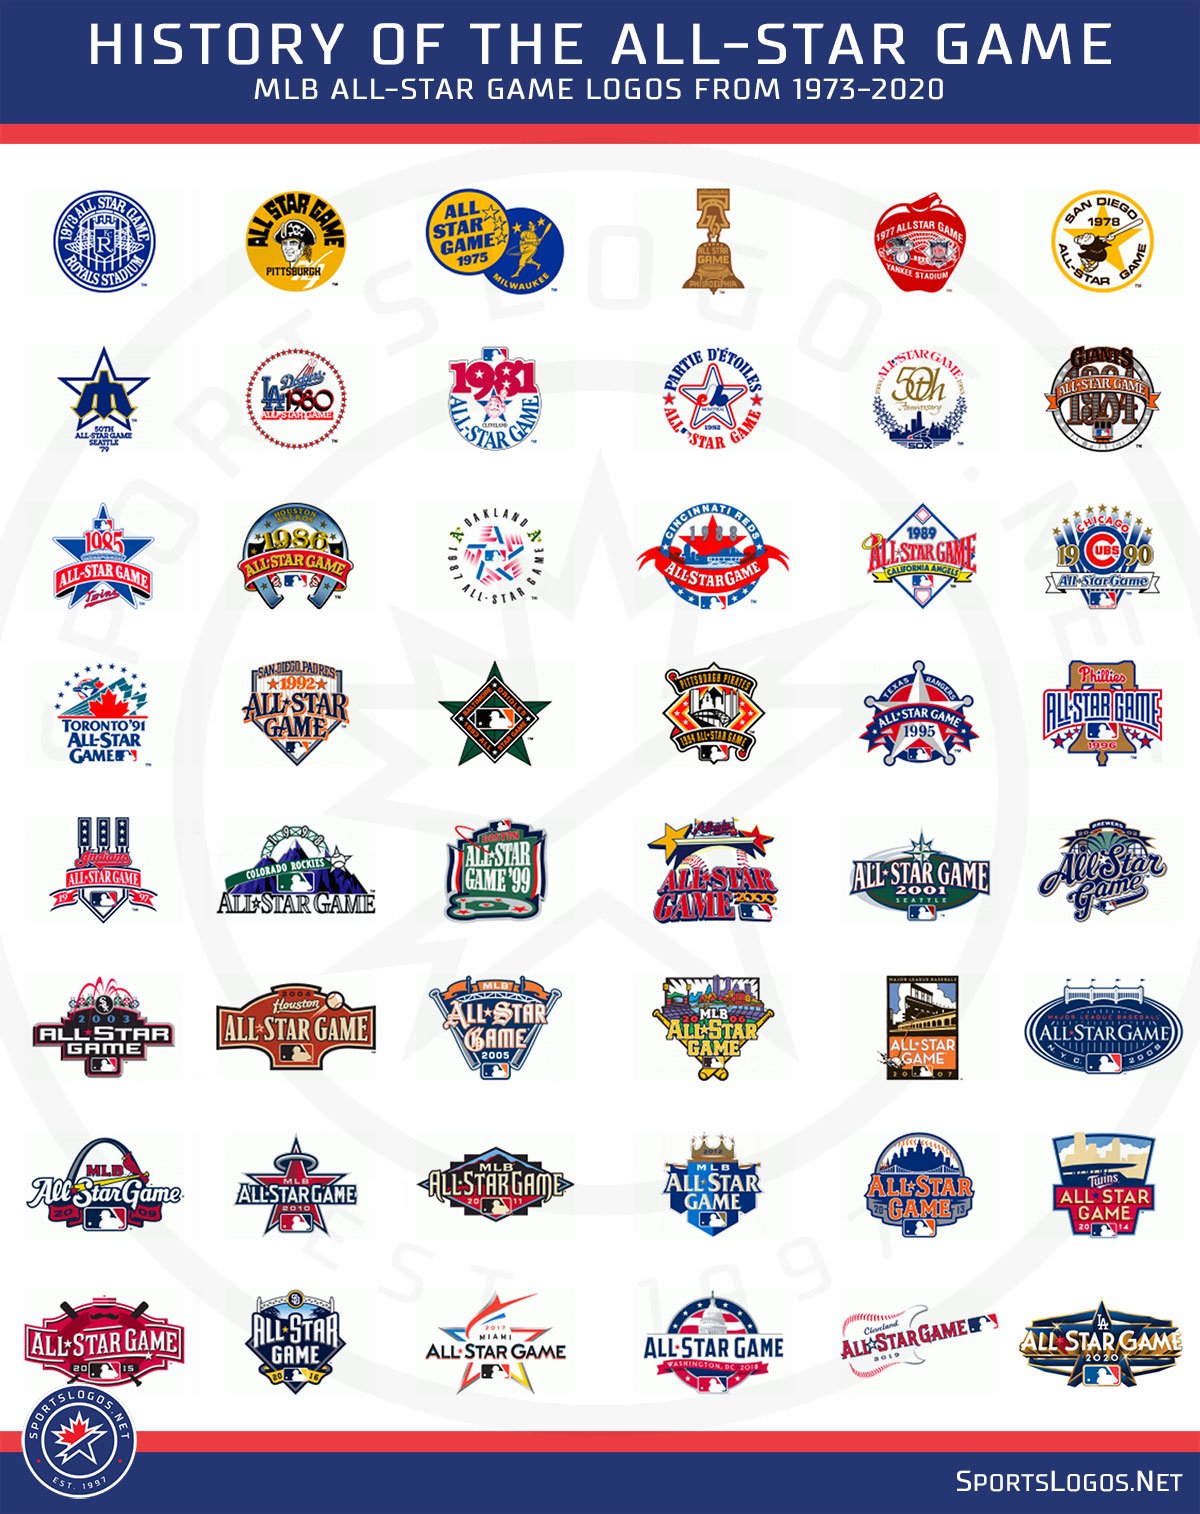 III. Evolution of the MLB All-Star Game Format